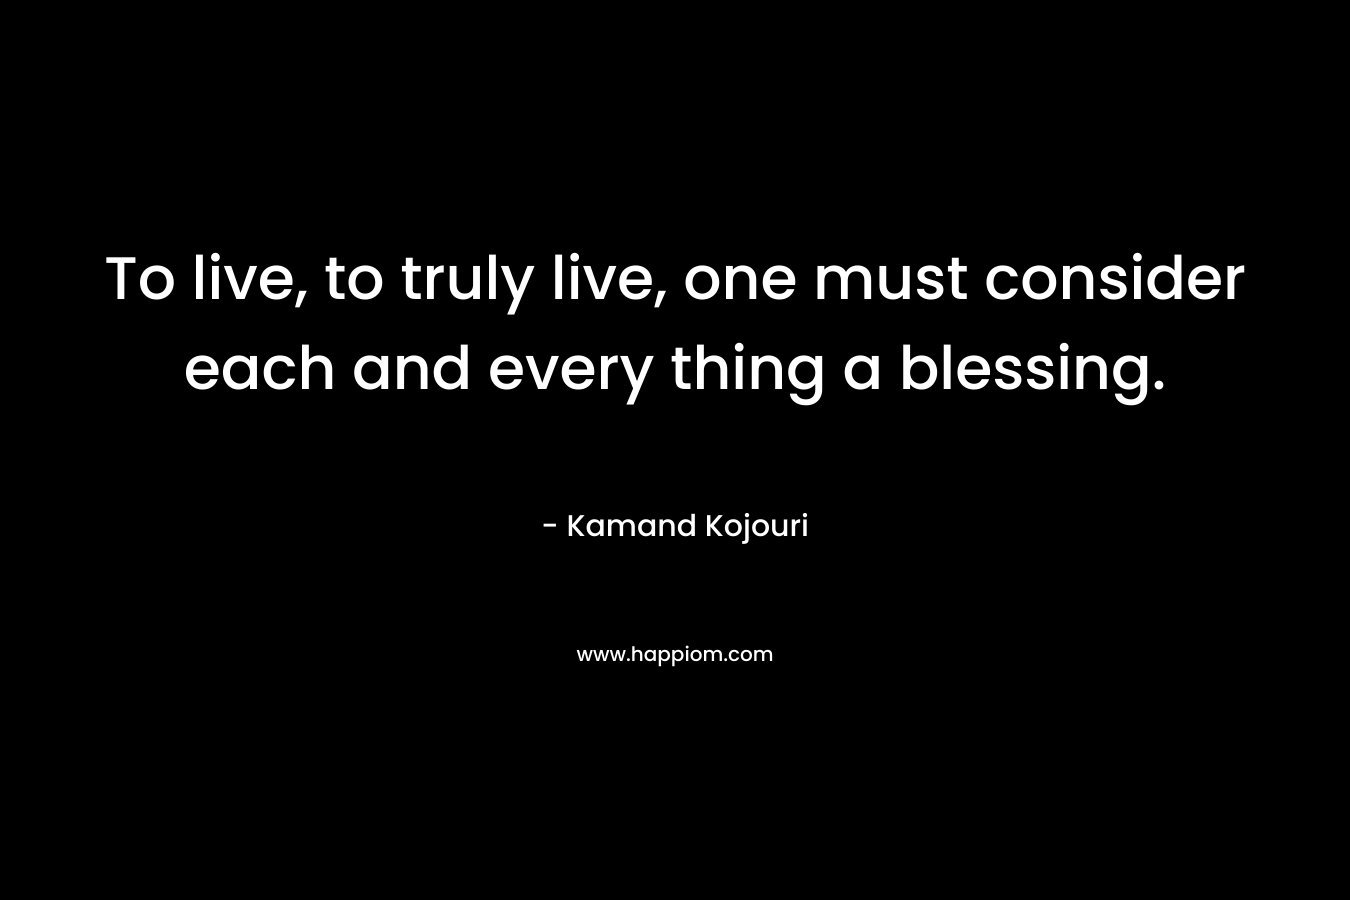 To live, to truly live, one must consider each and every thing a blessing.